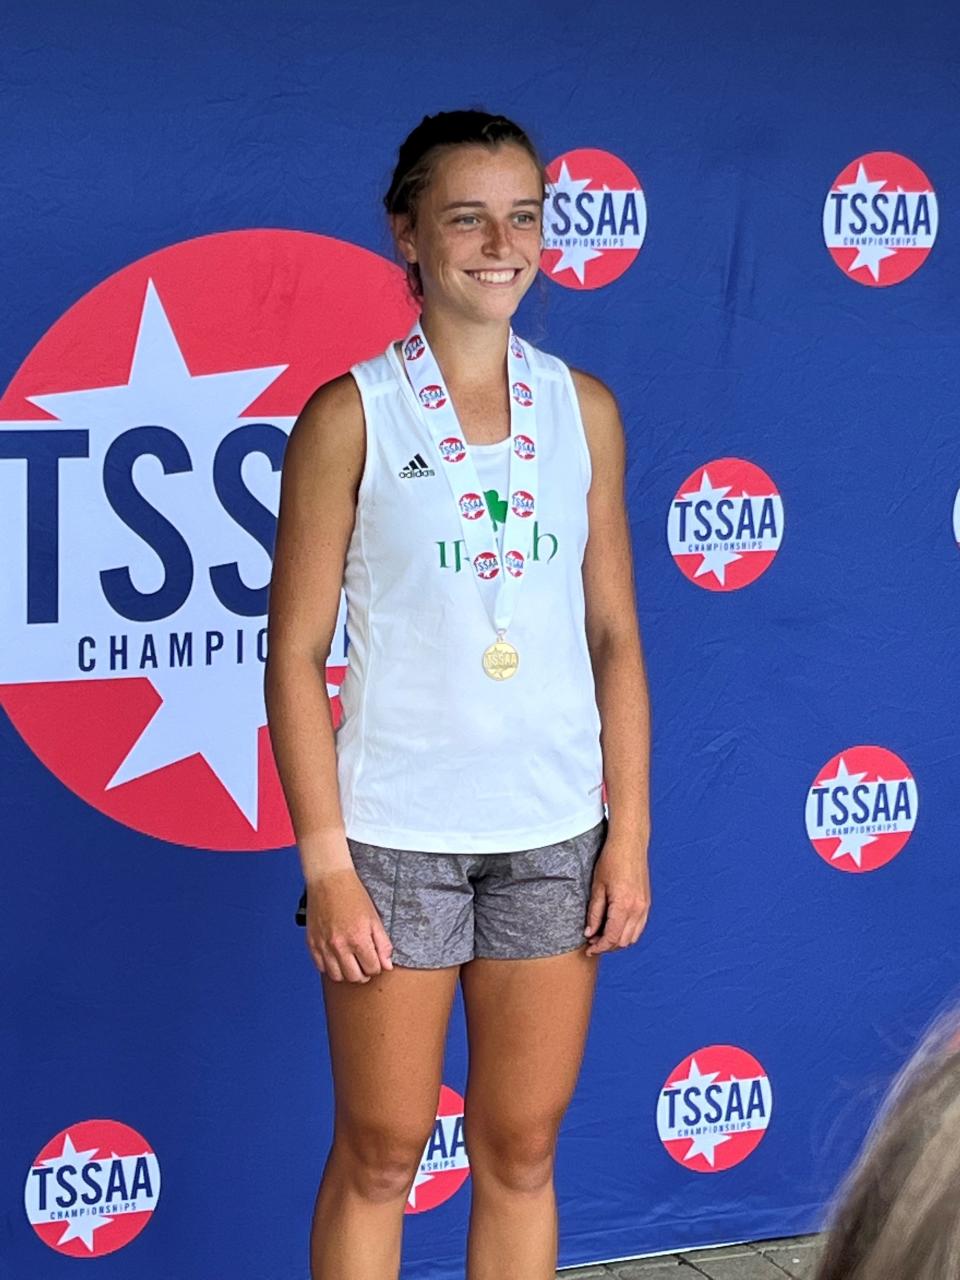 Catholic High junior Maeve Thornton is shown after receiving her medal for winning the girls’ single tennis championship at Murfreesboro on May 27, 2022.